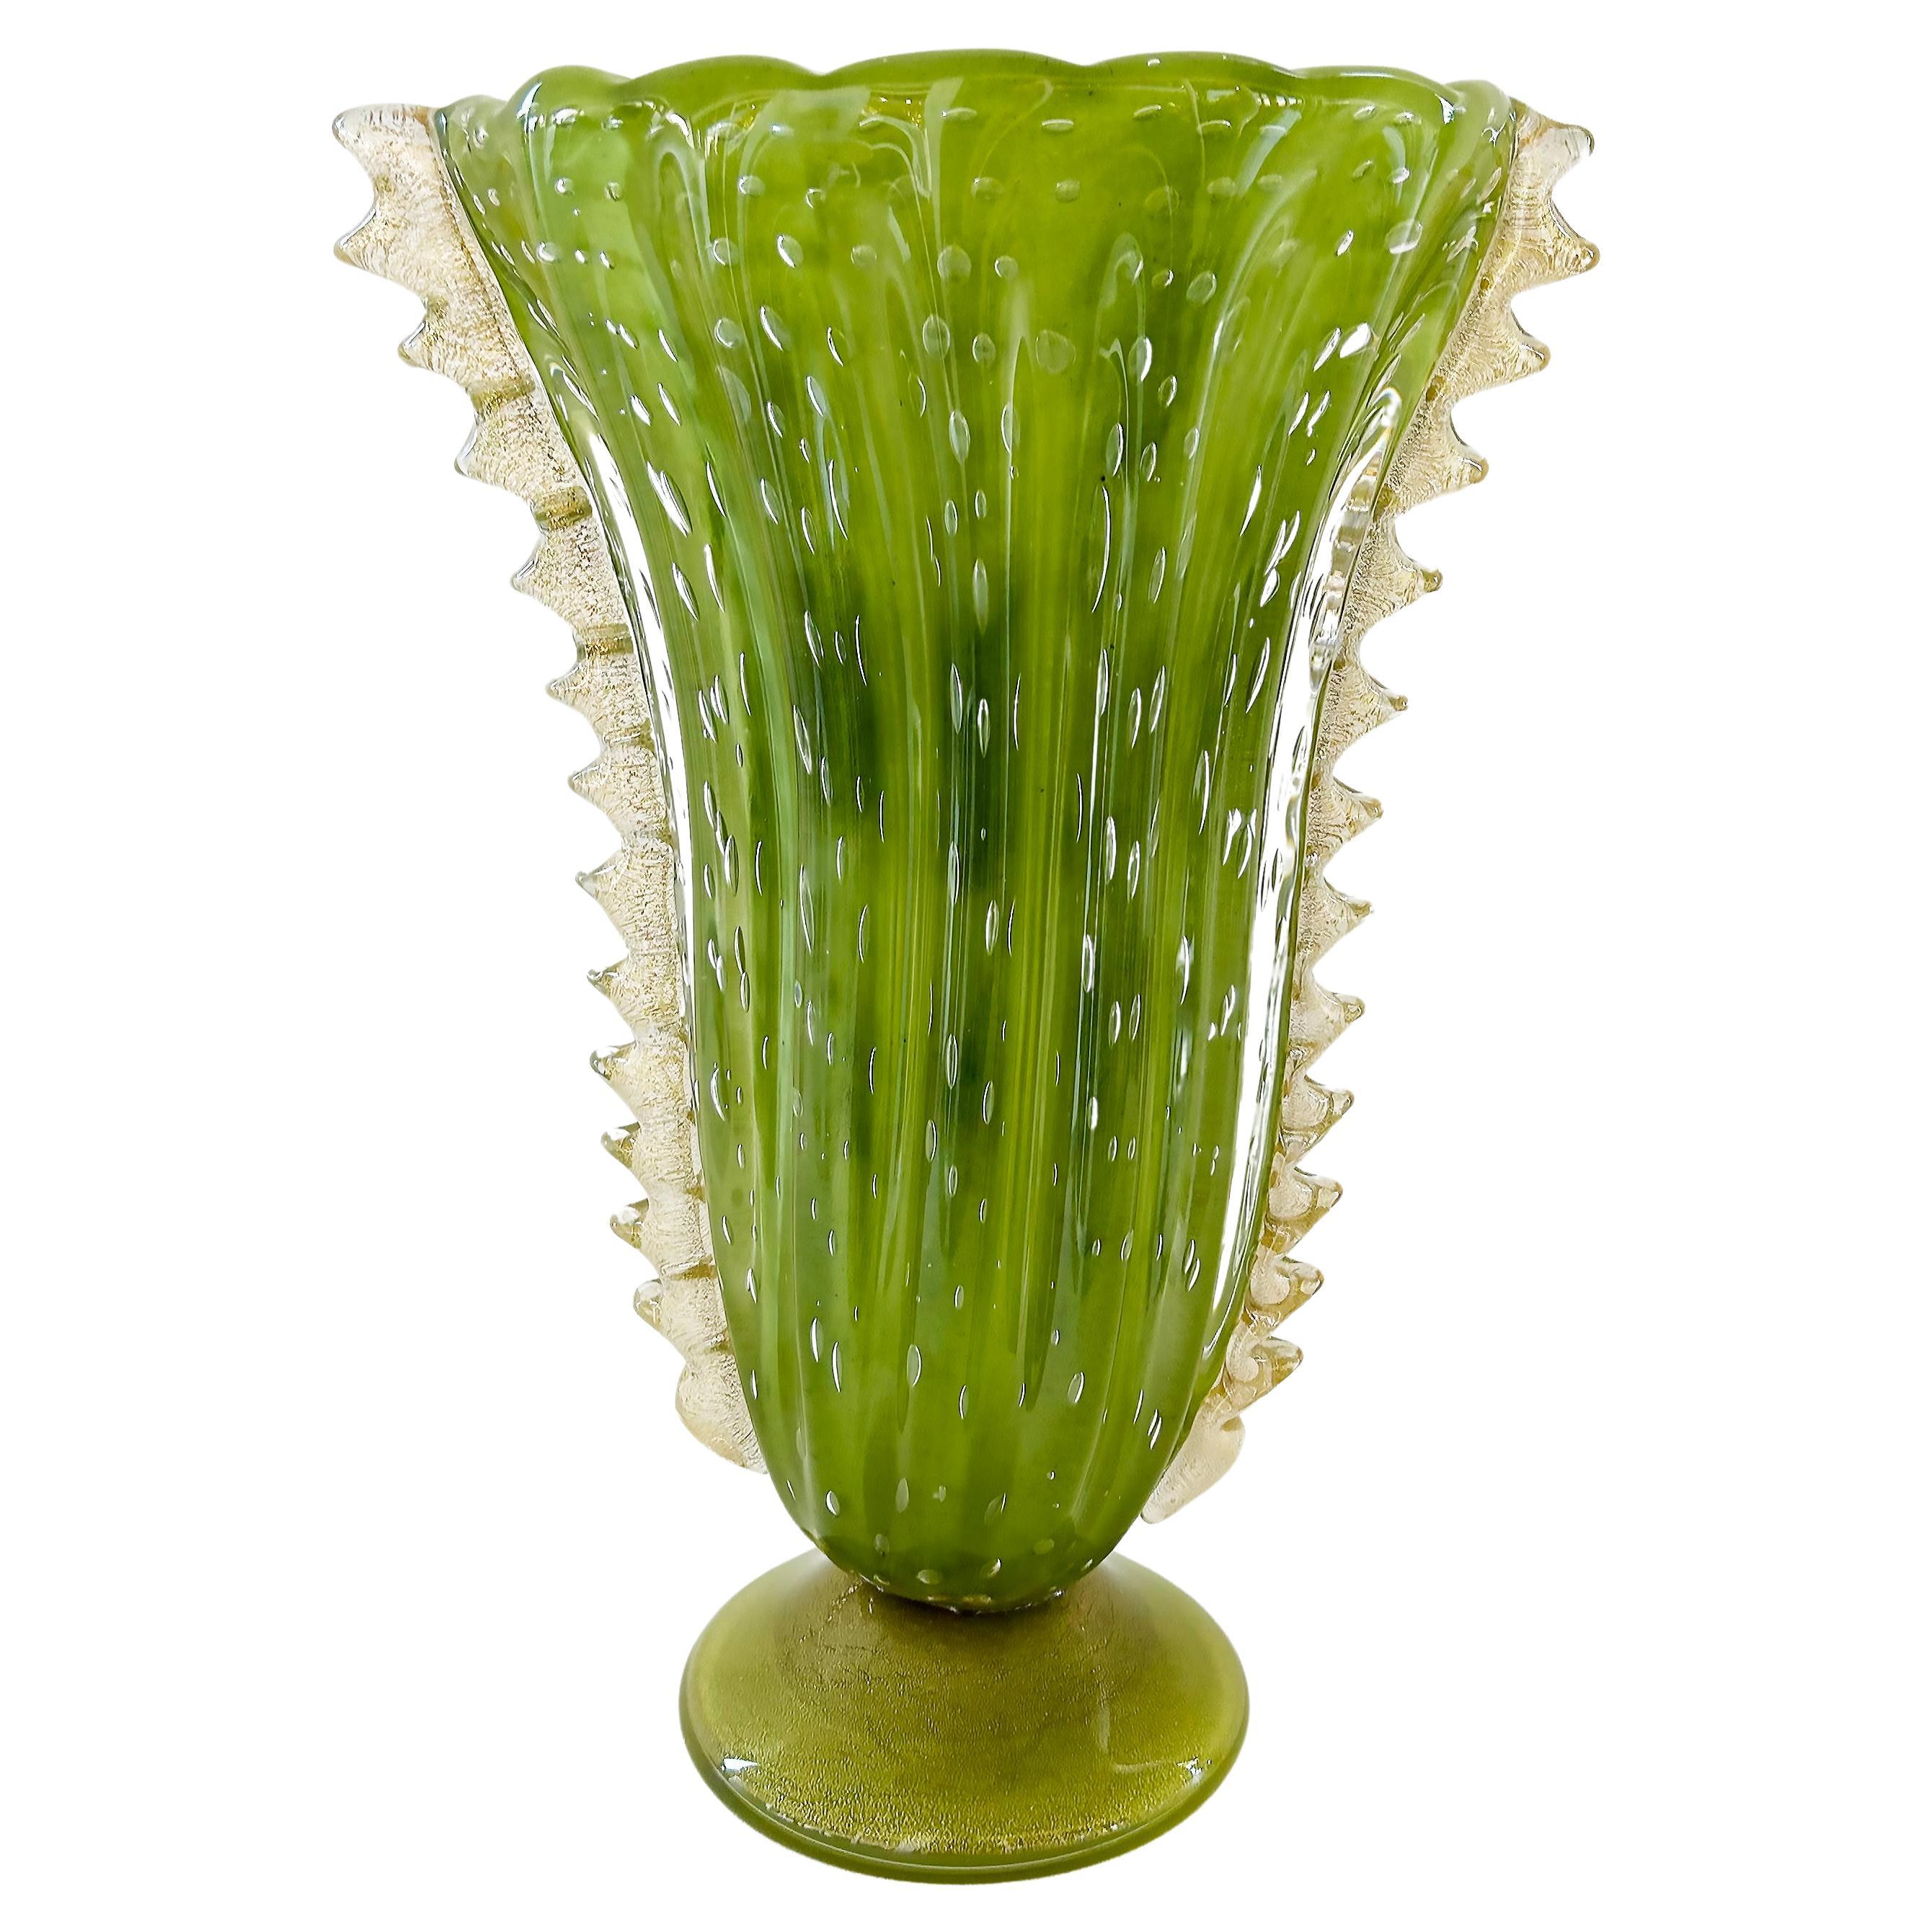 Barovier&Toso Murano Glass Bullicante Green Vase, Gold Infused Fins, Italy 